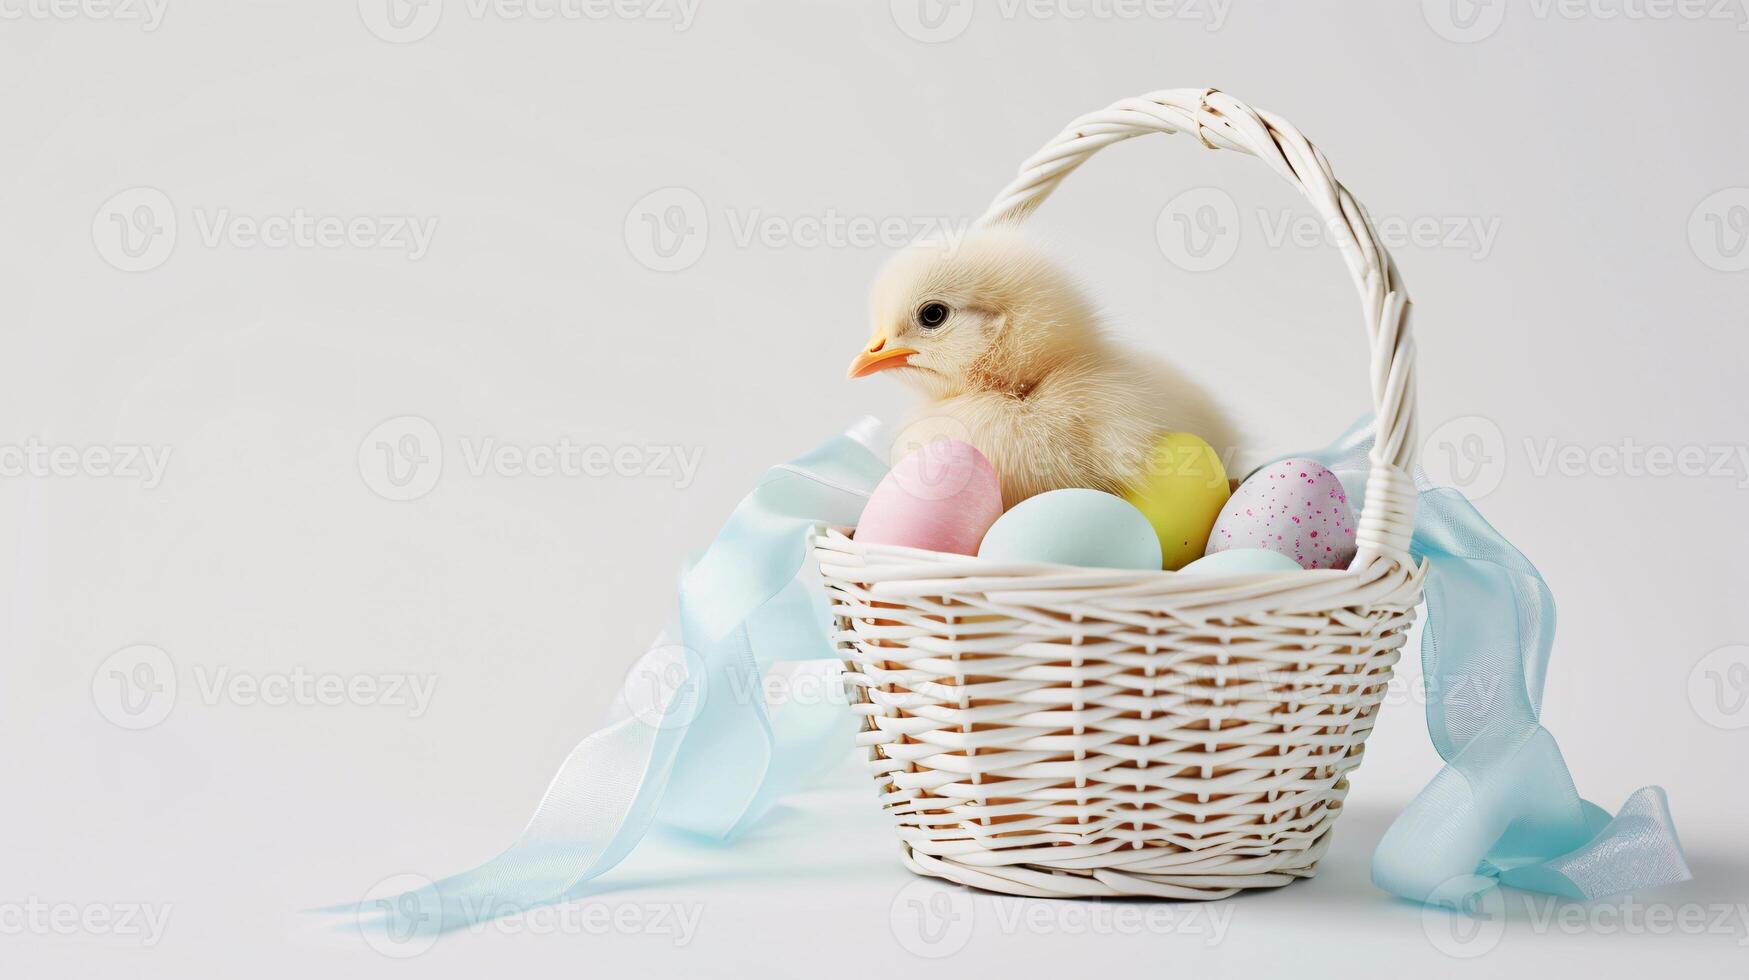 AI generated An Easter basket with a yellow chicken steals the spotlight, meticulously arranged against a clear, radiant white background and copy space for text photo